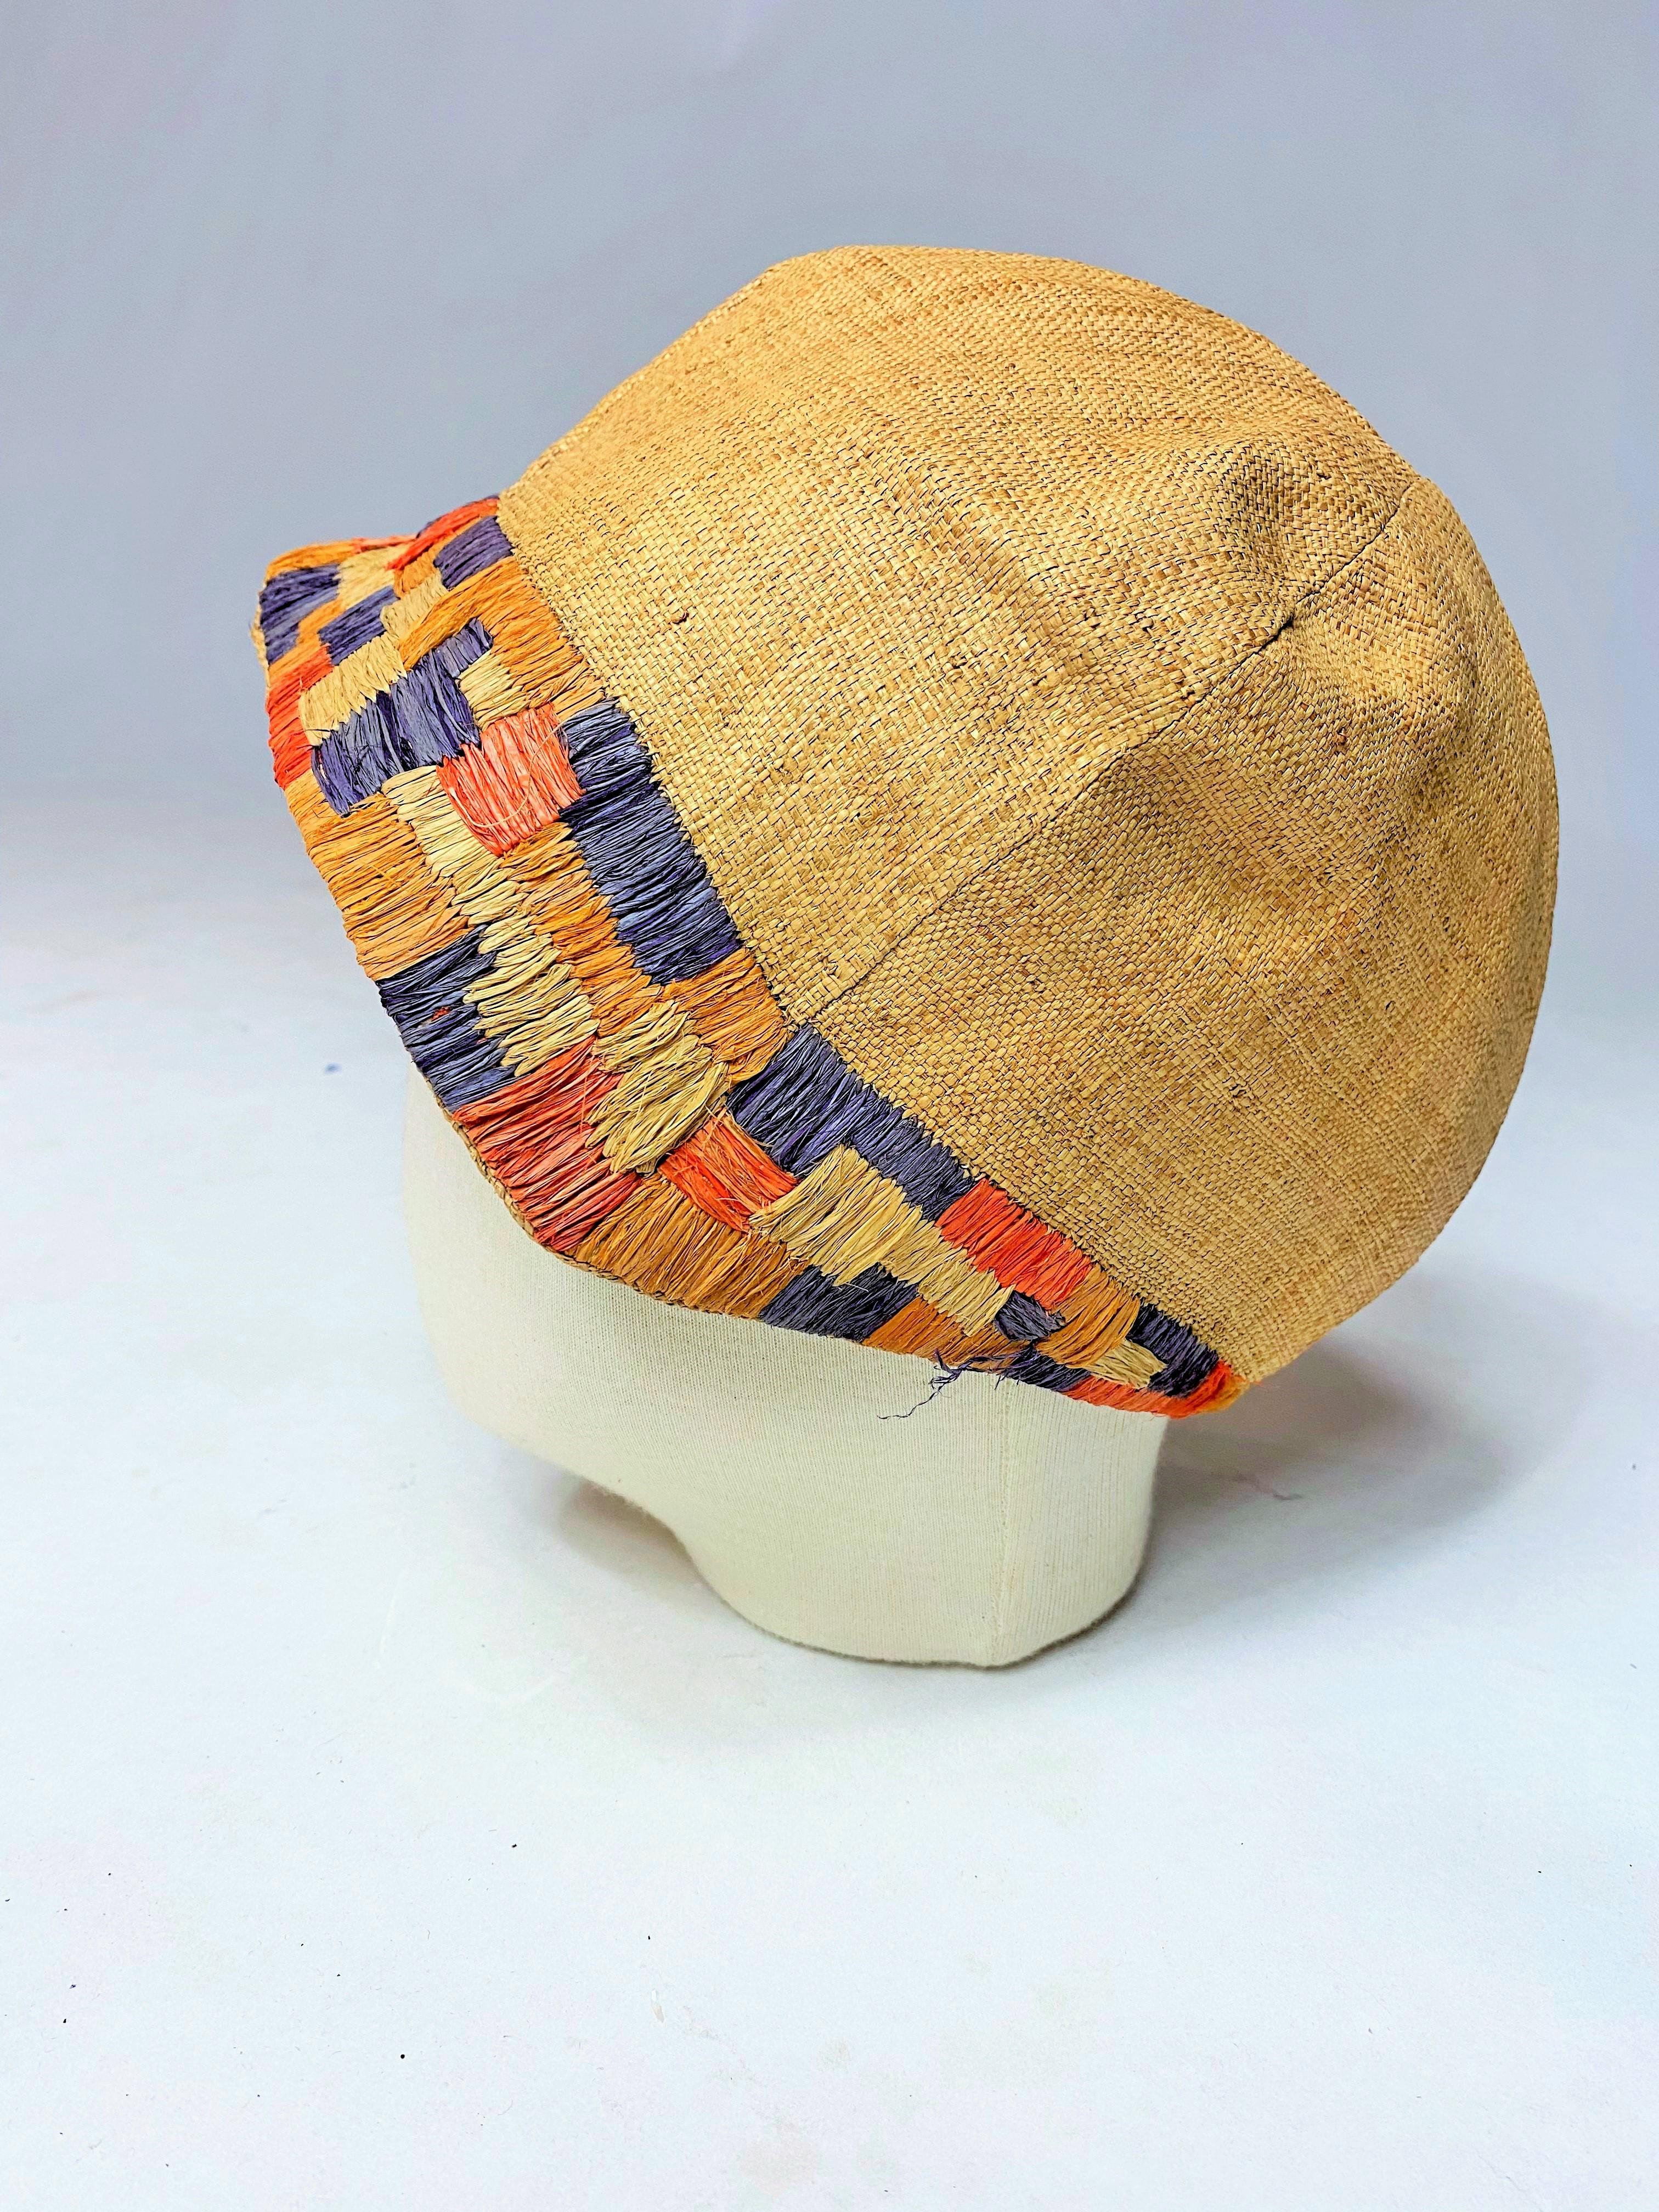 Circa 1925
Germany

Rare cloche hat or capote made of woven straw and colored Rafia embroidery dating from the Modernist Bauhaus period in Germany. Collected in Berlin. Interesting Cubist or Simultaneous graphics, a bit like what Sonia Delaunay and